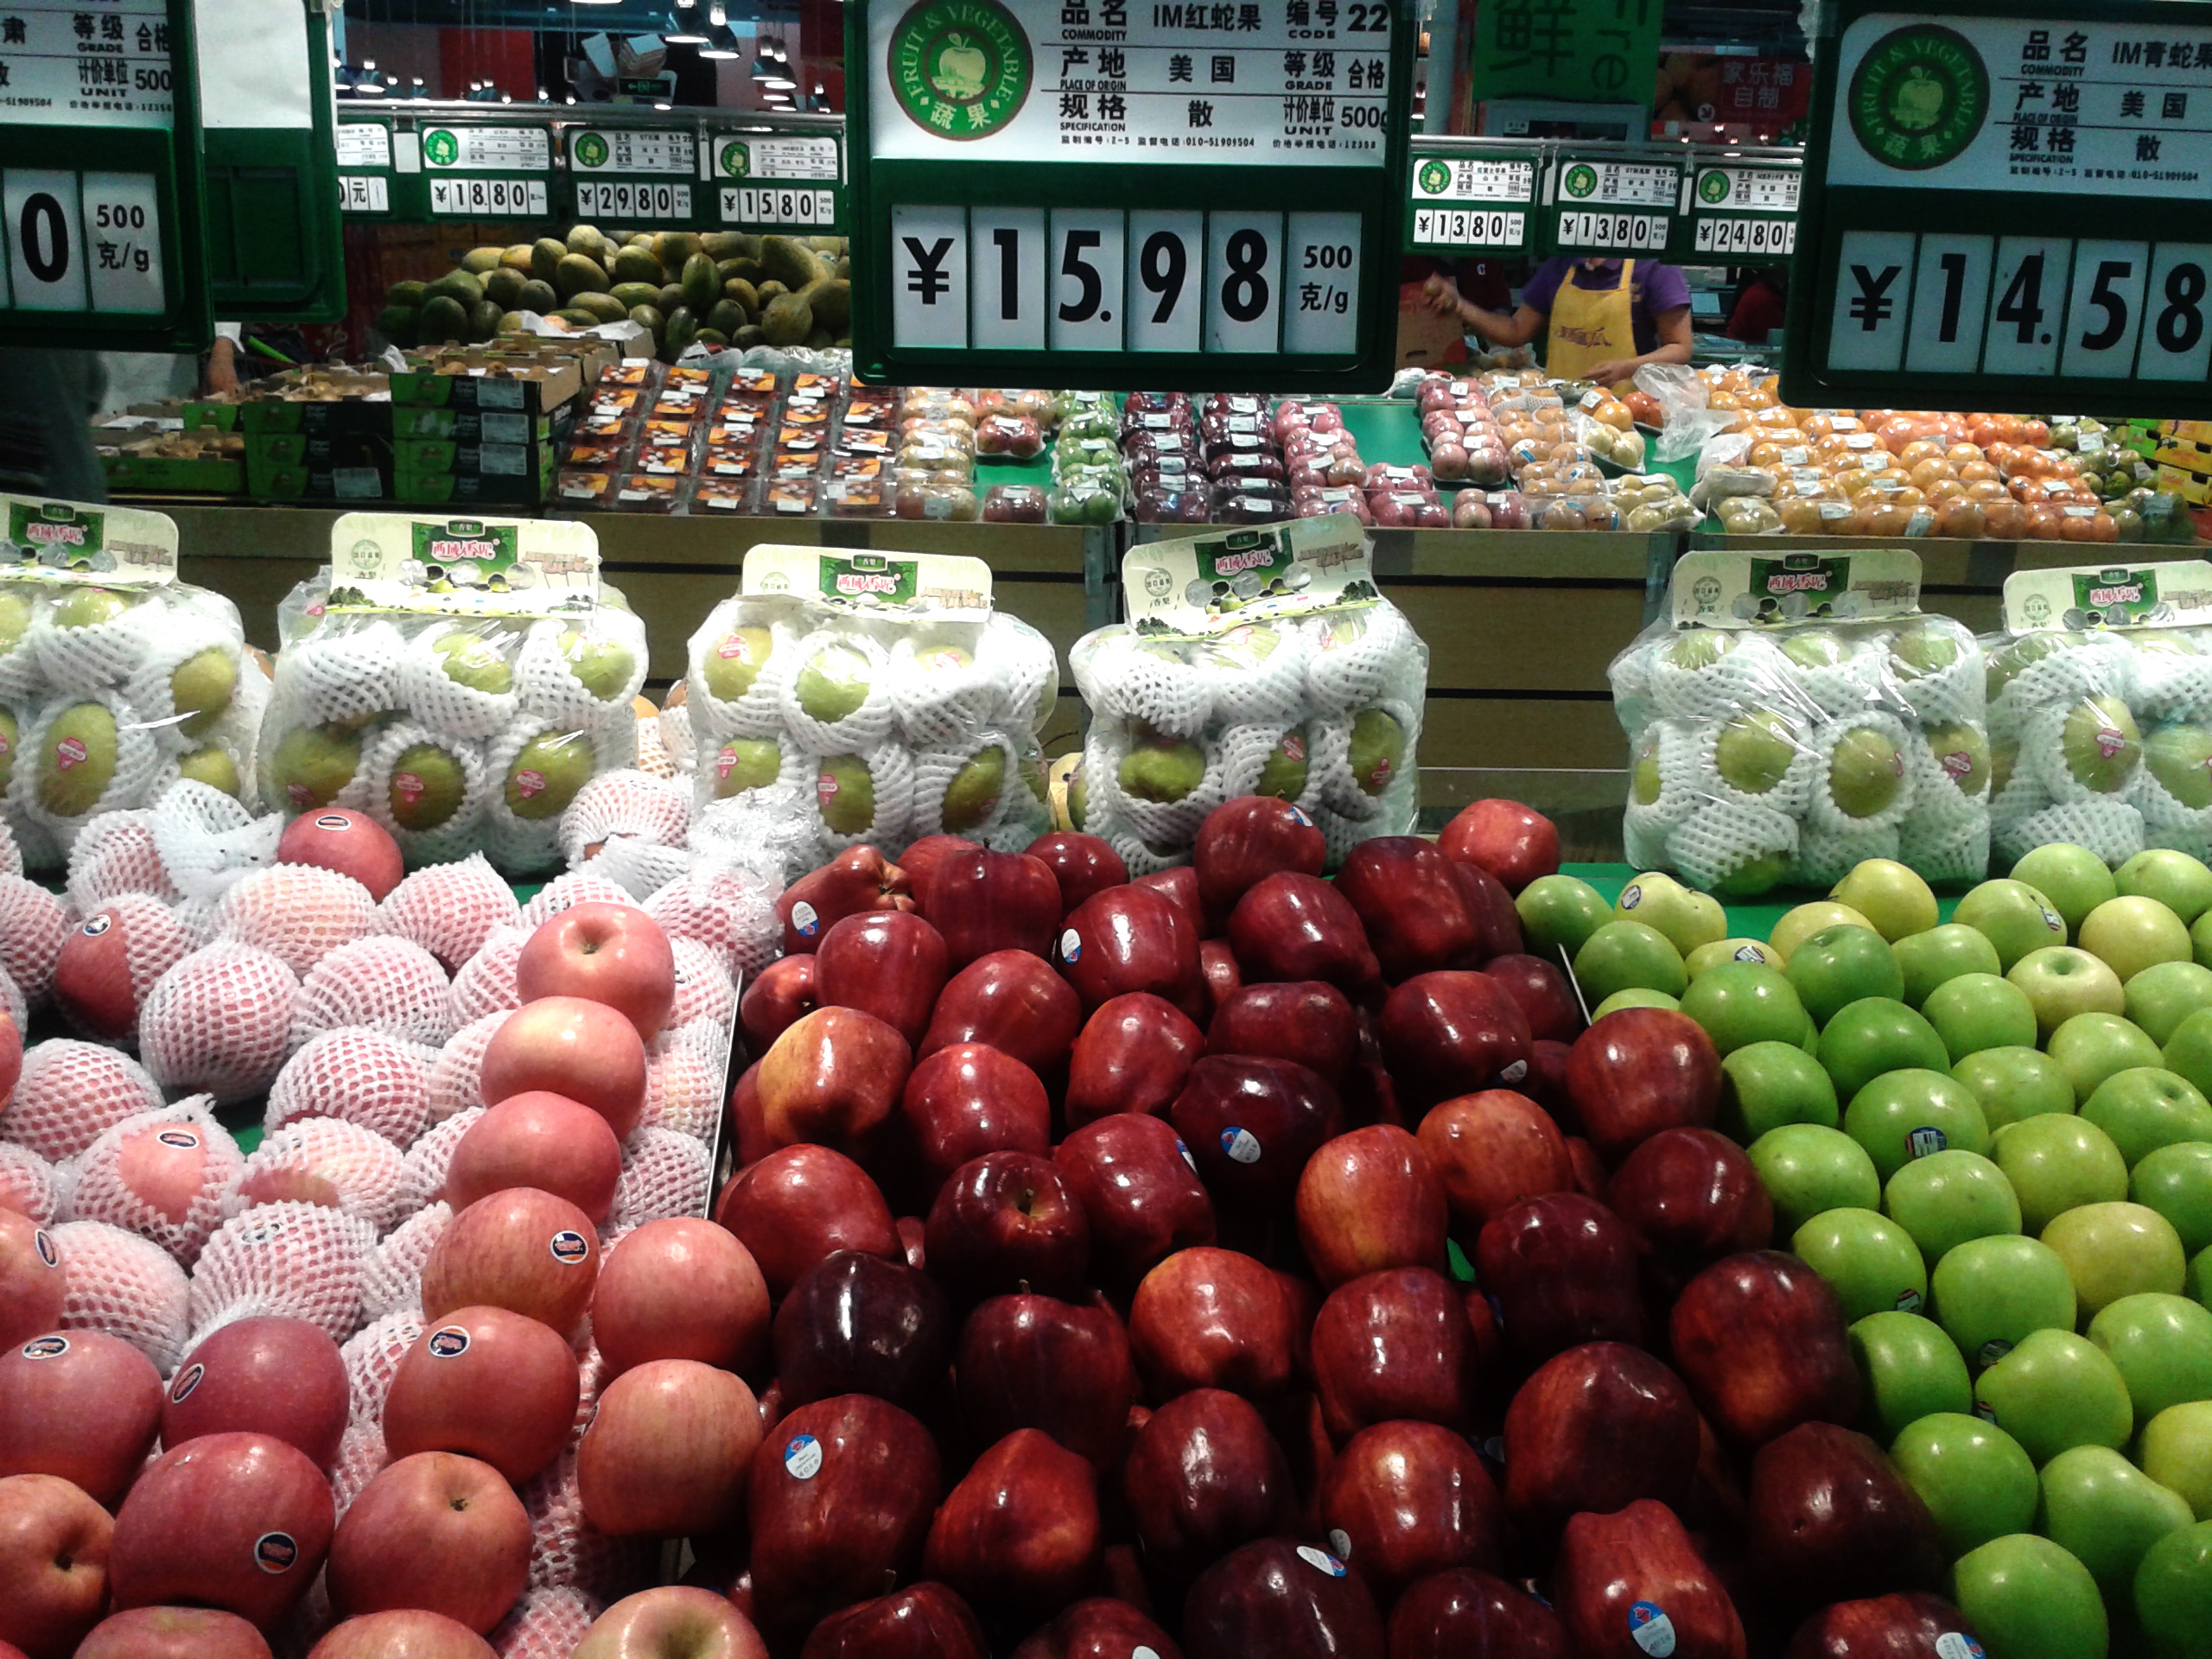 NEWS expo CHINA FVF Imported Fruits CARREFOUR